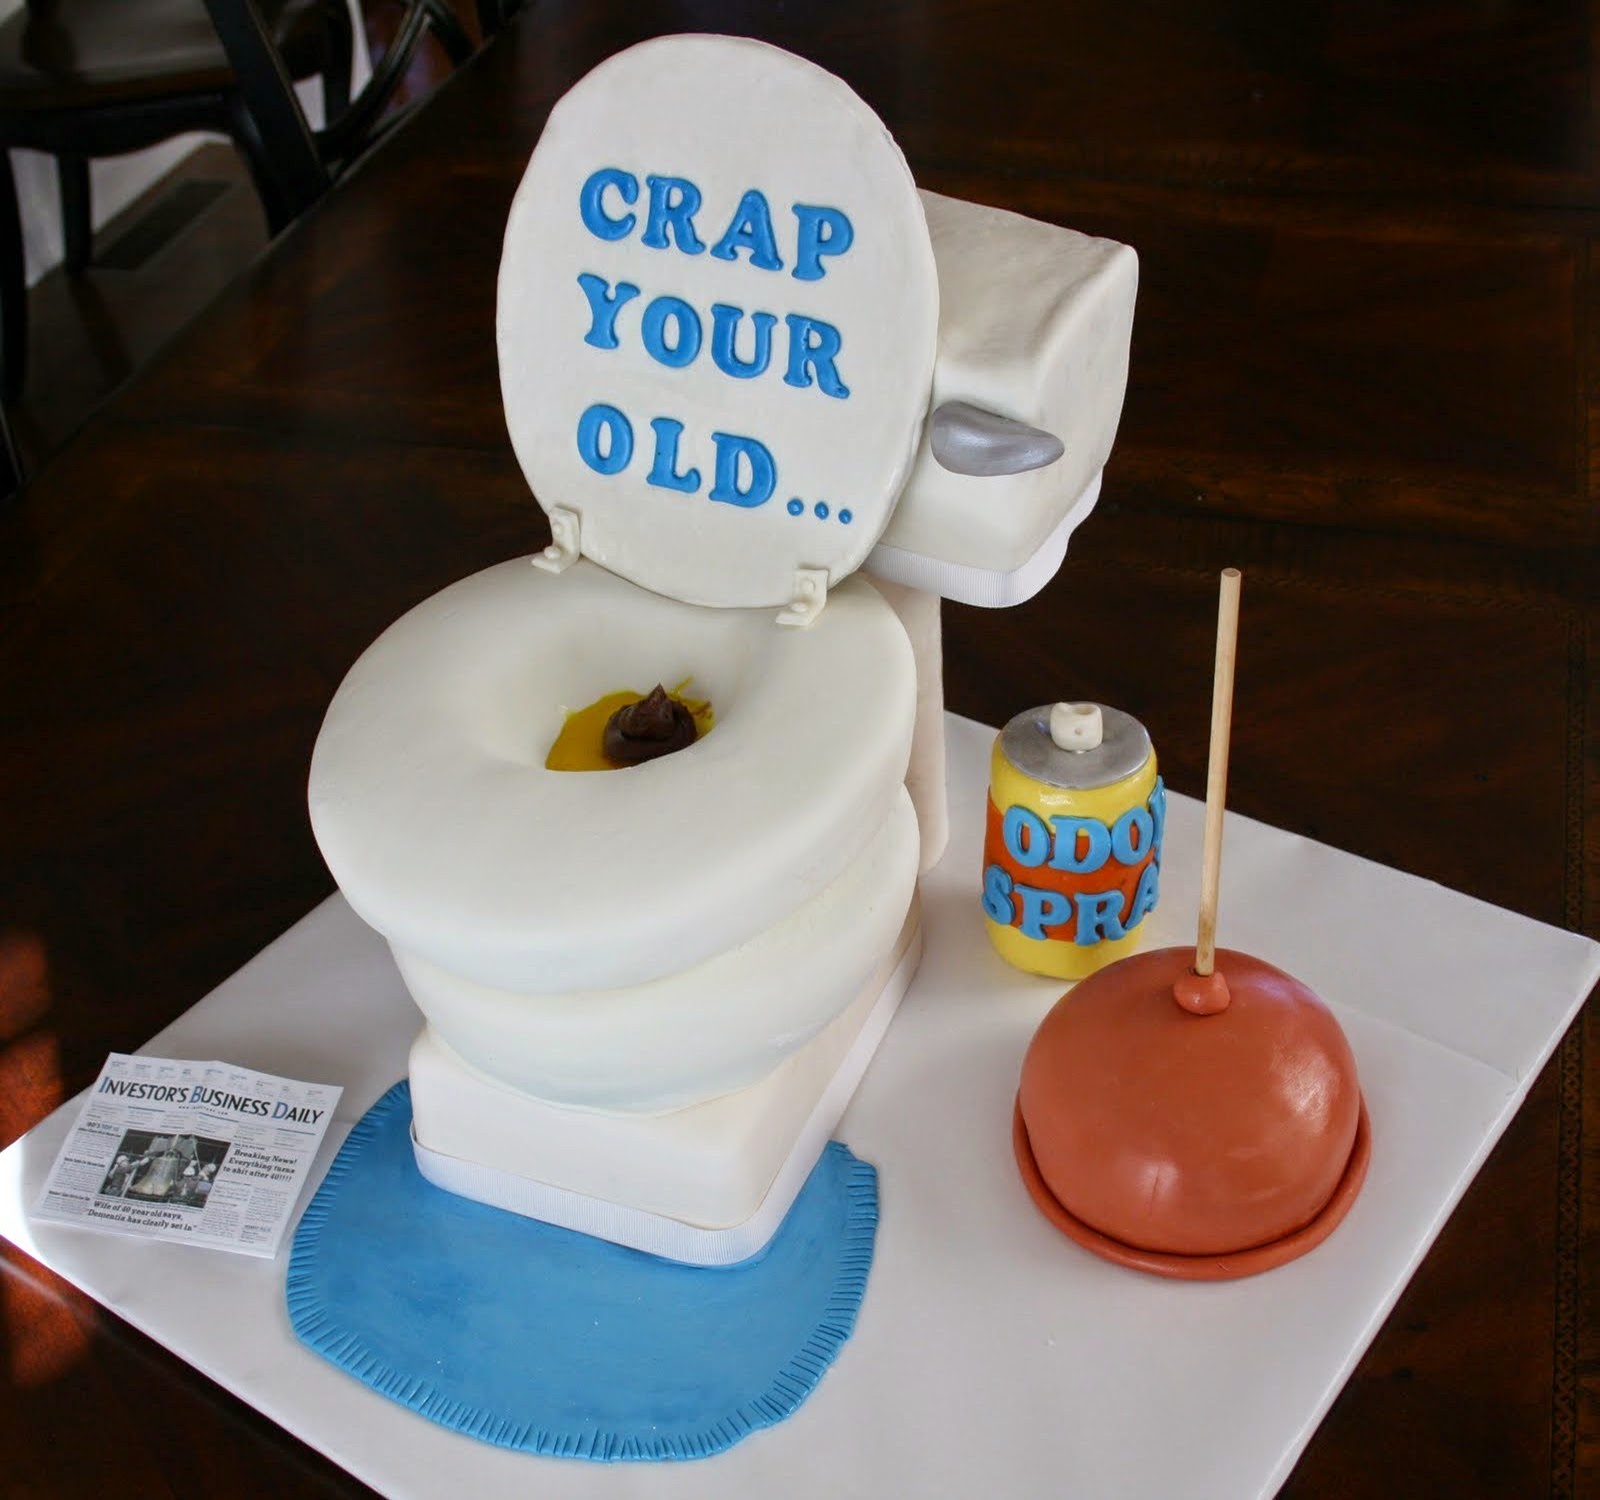 Birthday cake most funny image 2015-2016 ~ FUN Funny Funniest Photo